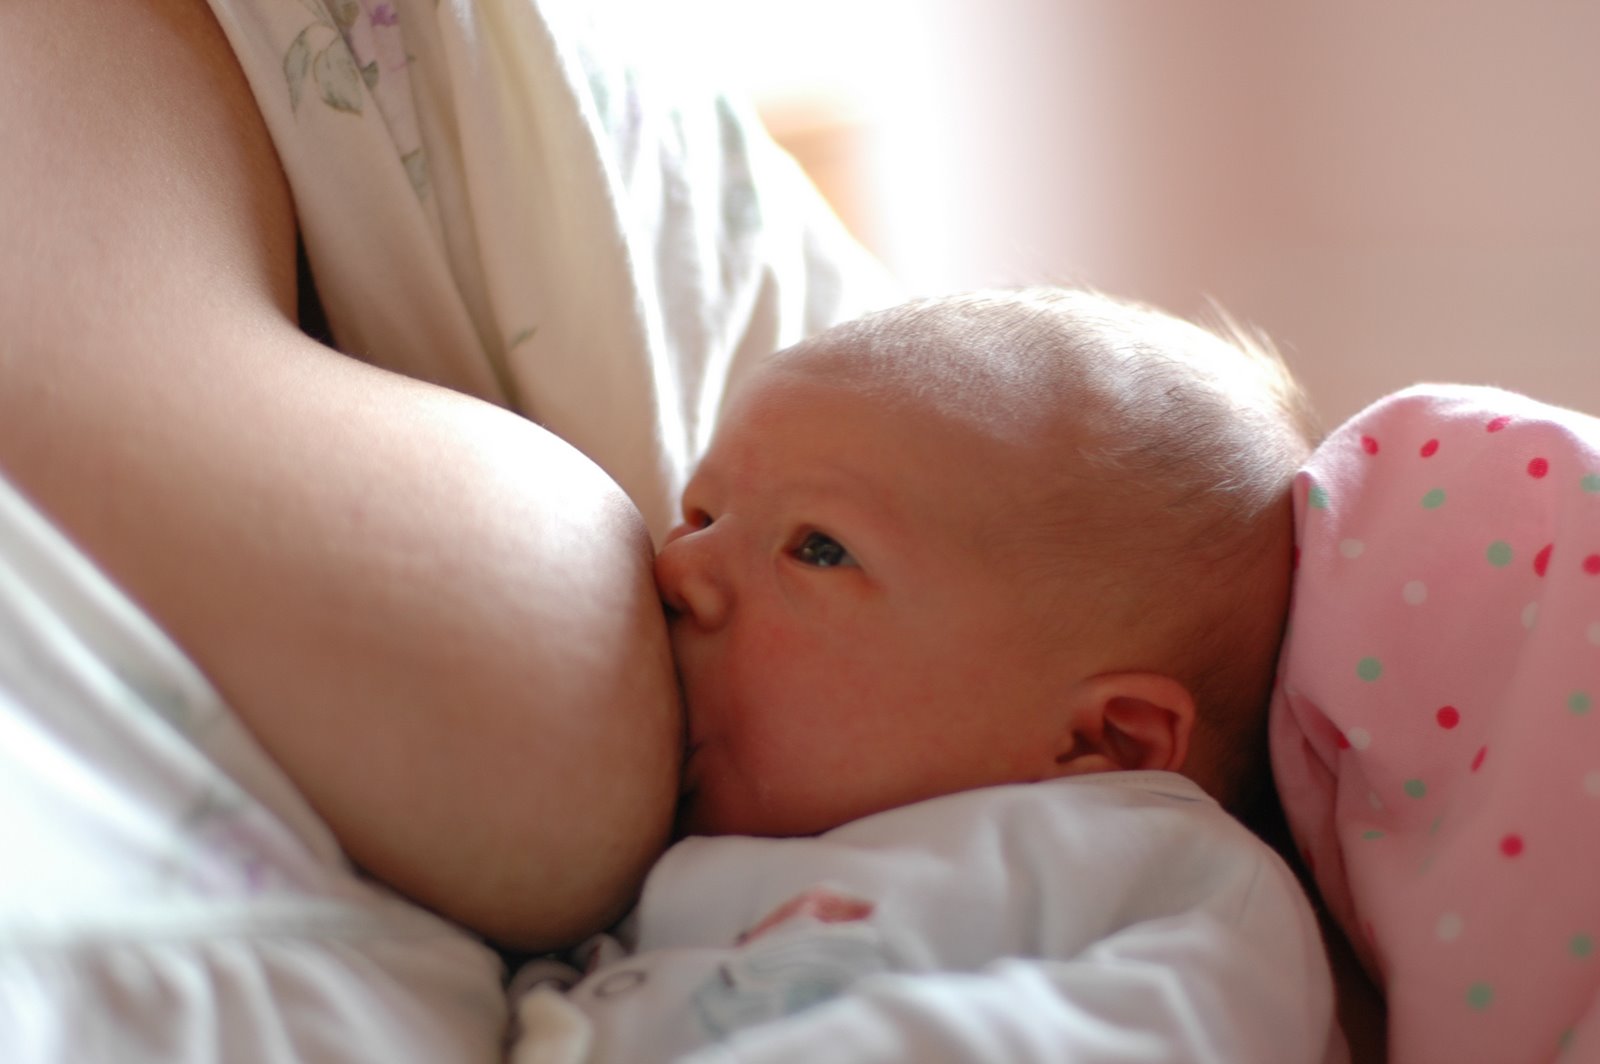 Breastfeeding leads to higher IQ, earnings later: study